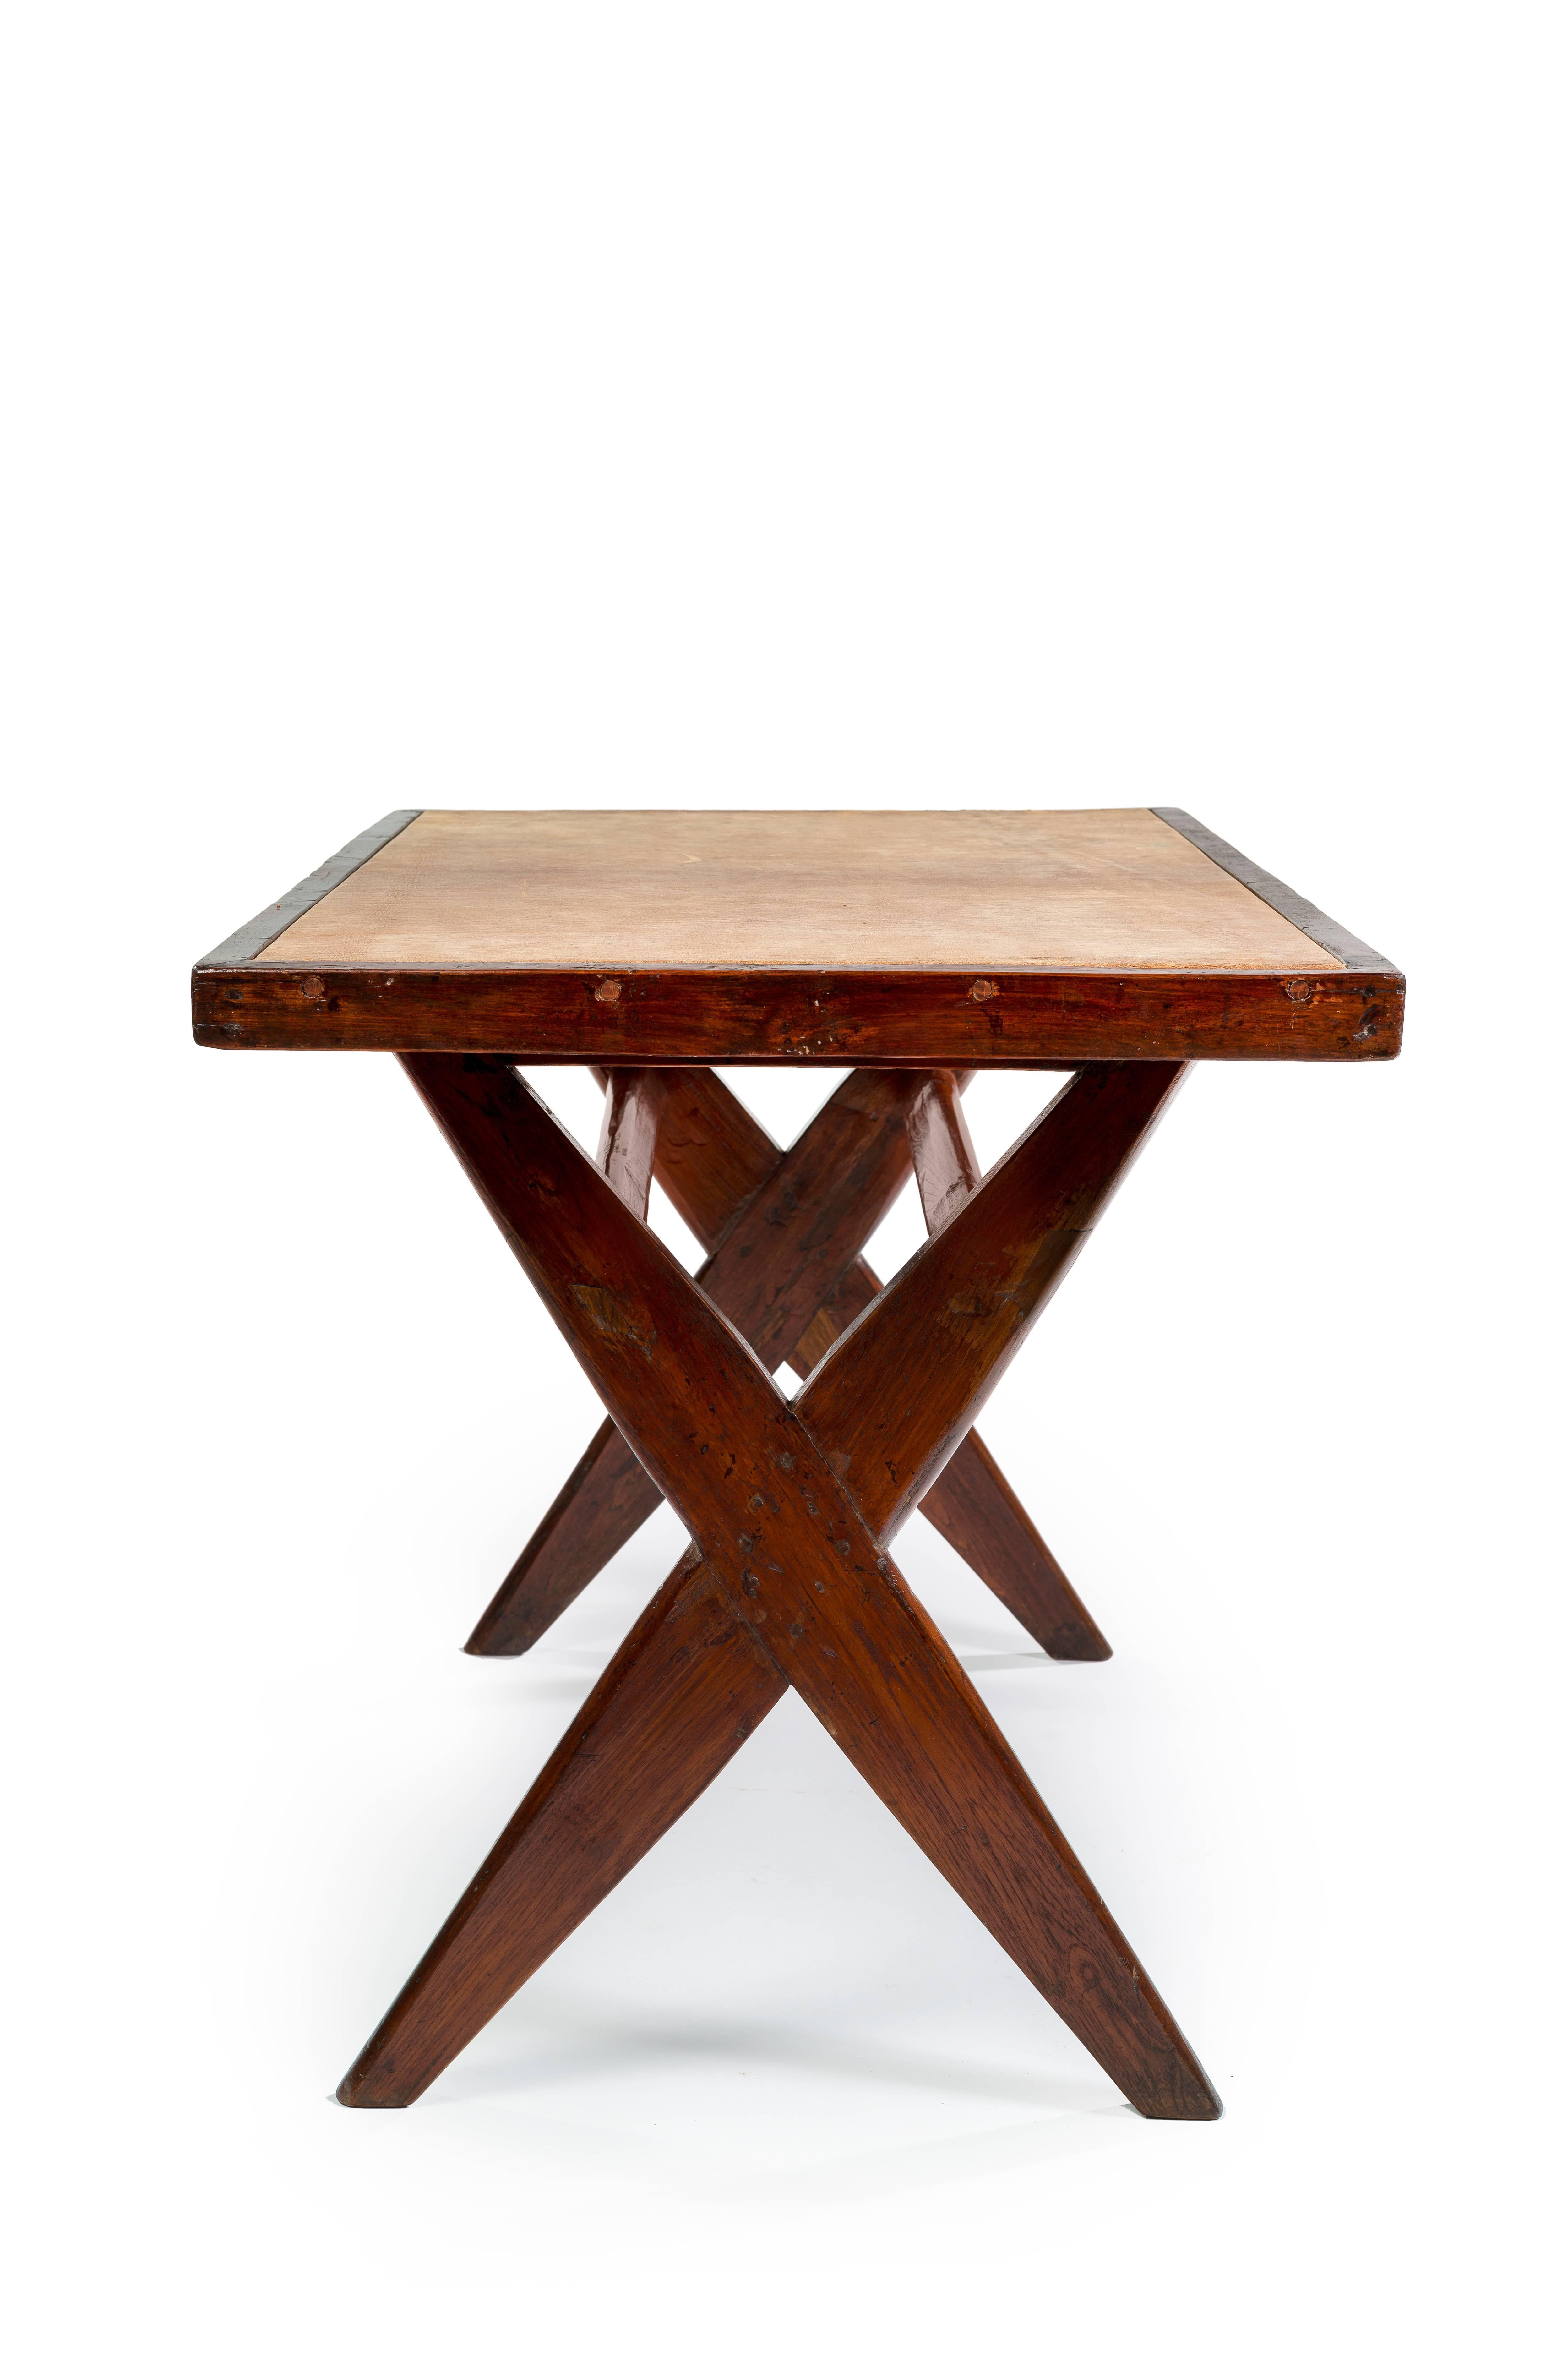 Indian Pierre Jeanneret, Reading Table, Teck and Leather, circa 1961